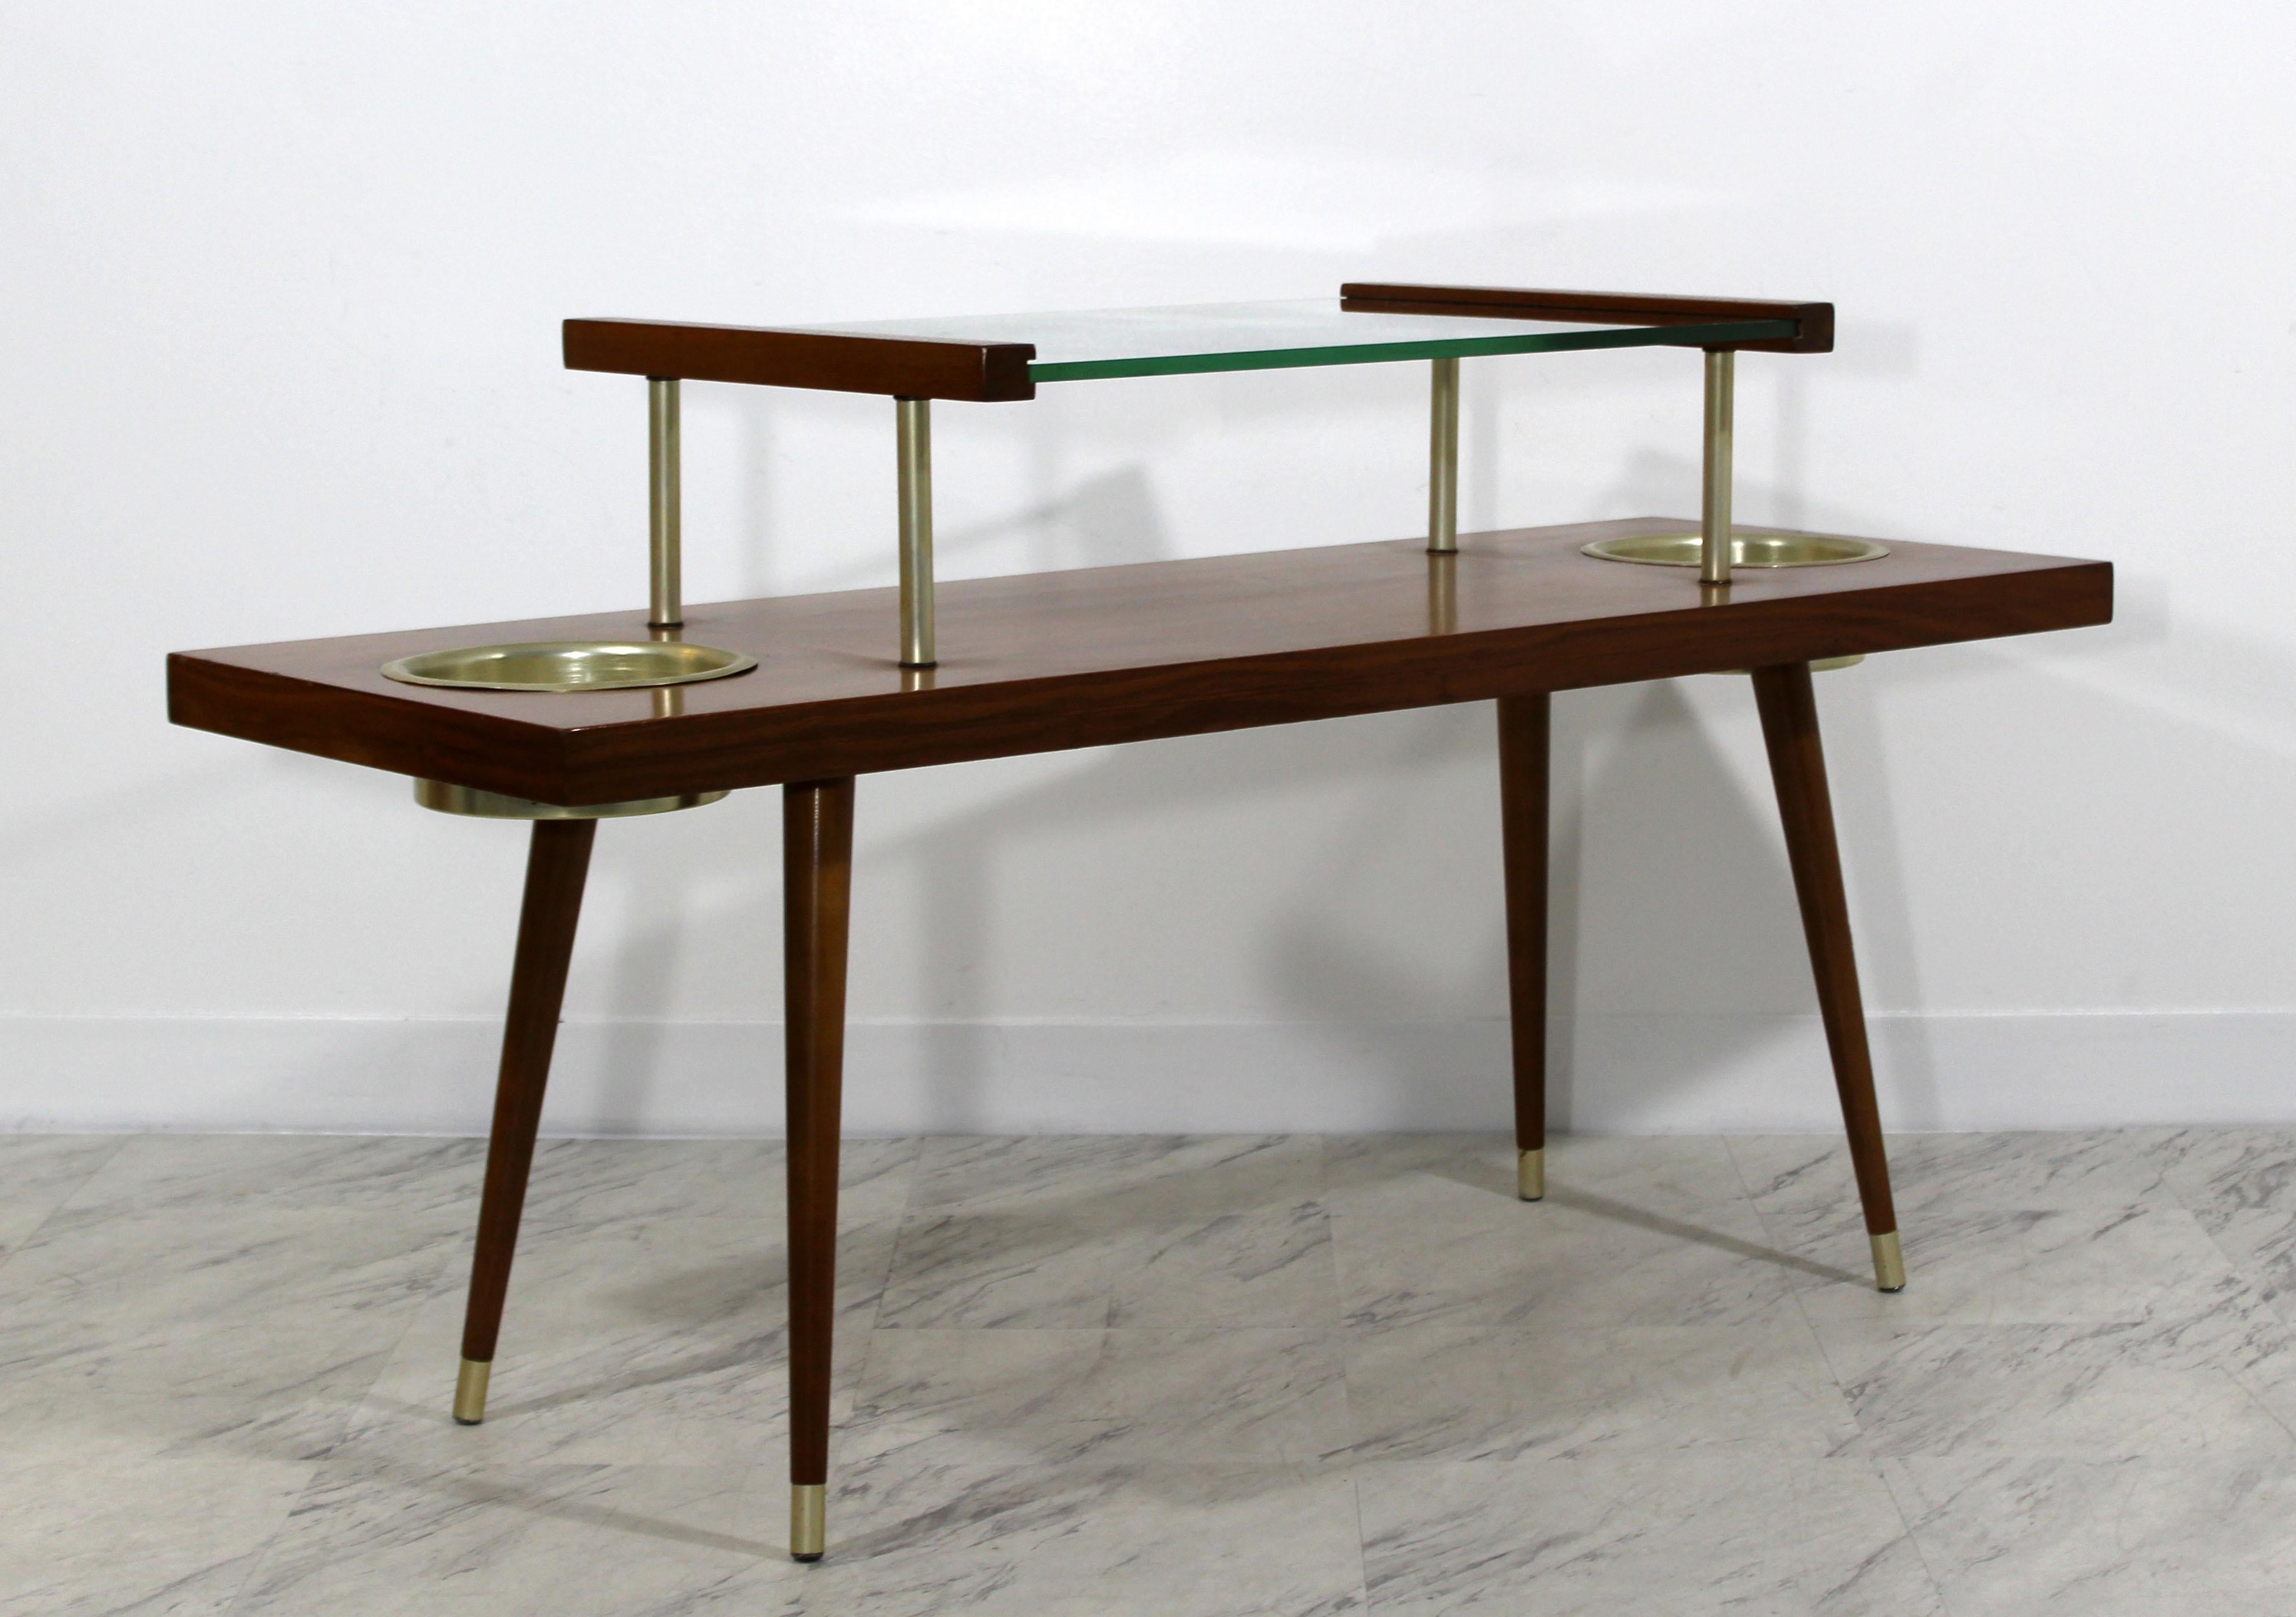 For your consideration is an magnificent, walnut coffee table, made of walnut, with a tier glass top and two built-in brass planters, in the style of Paul McCobb, circa 1960s. In very good condition. The dimensions of the table are 48